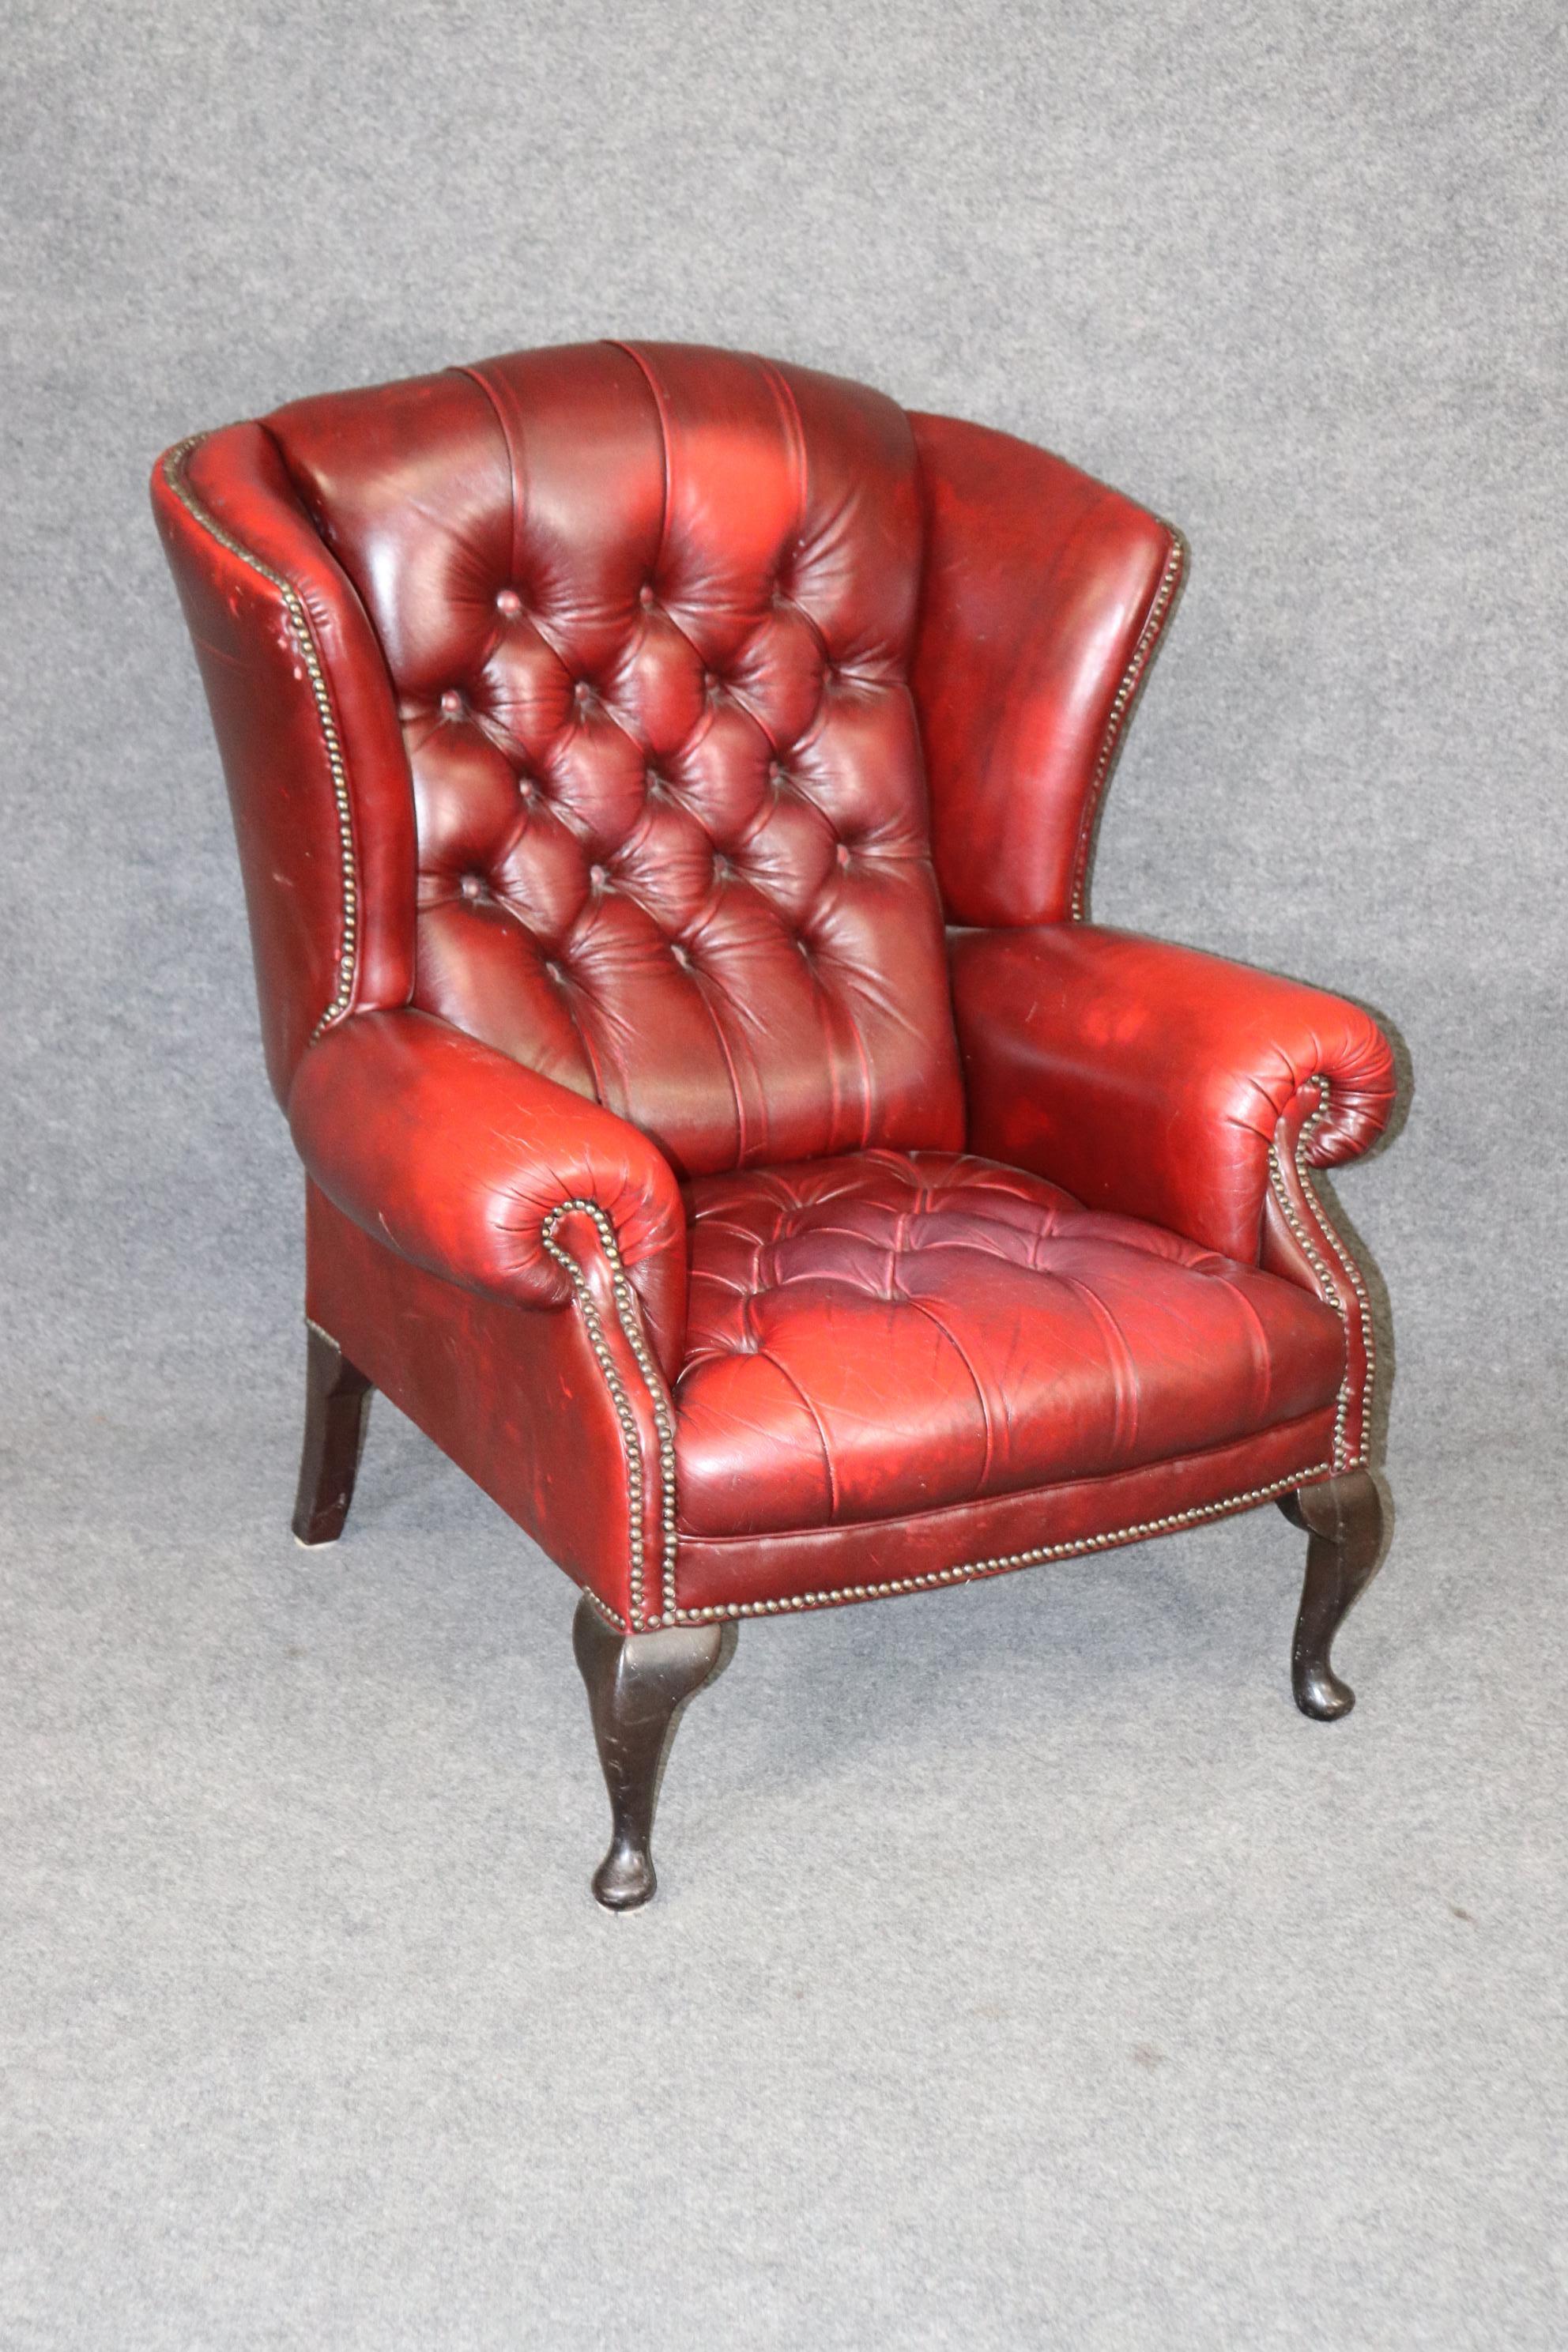 This is a beautiful time-distressed beautifully worn leather armchair in the chesterfield style. The chair has nermous signs of age and wear as can be seen in the photos and actually looks better in person. The chair measures 42.5 tall x 33.5 wide x